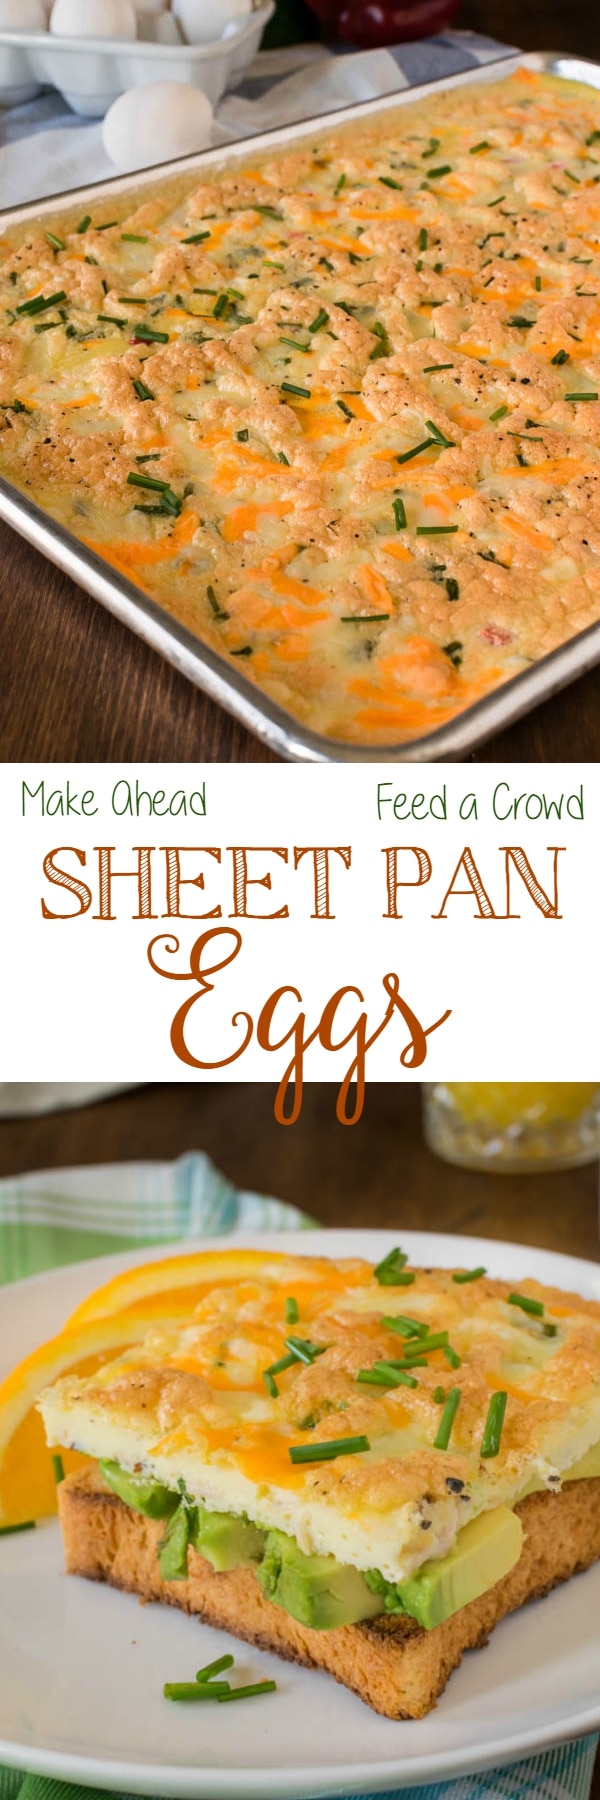 Whether you are making breakfast for the week or feeding a crowd, these Sheet Pan Eggs will help you save time in the mornings. Perfect for when you are on the go but still want a hearty, healthy breakfast to kick-start the day.